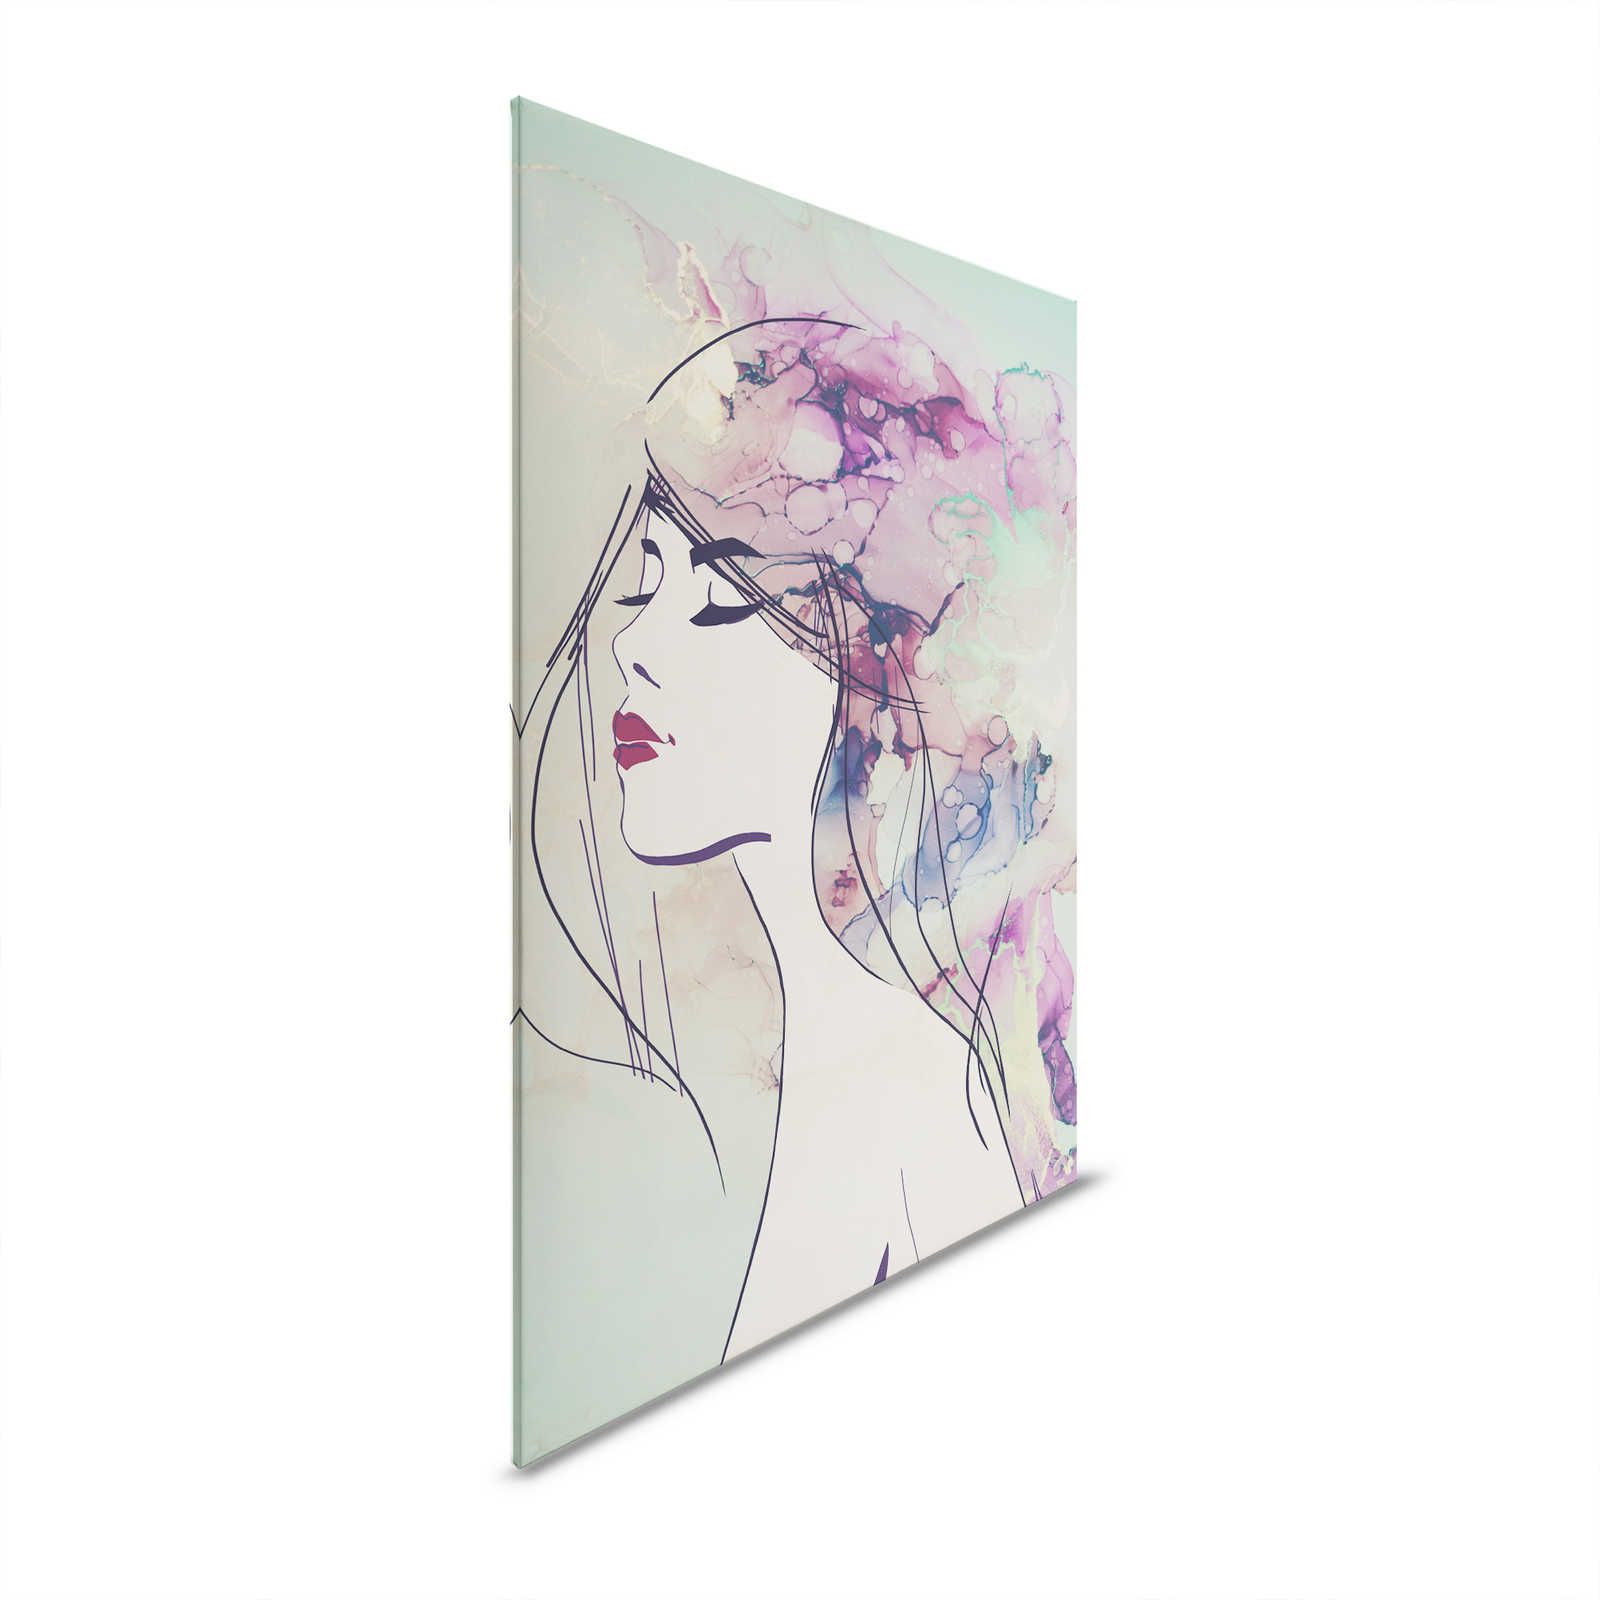         Acrylic Design Canvas Painting Woman Face in Turquoise & Purple - 0,90 m x 0,60 m
    